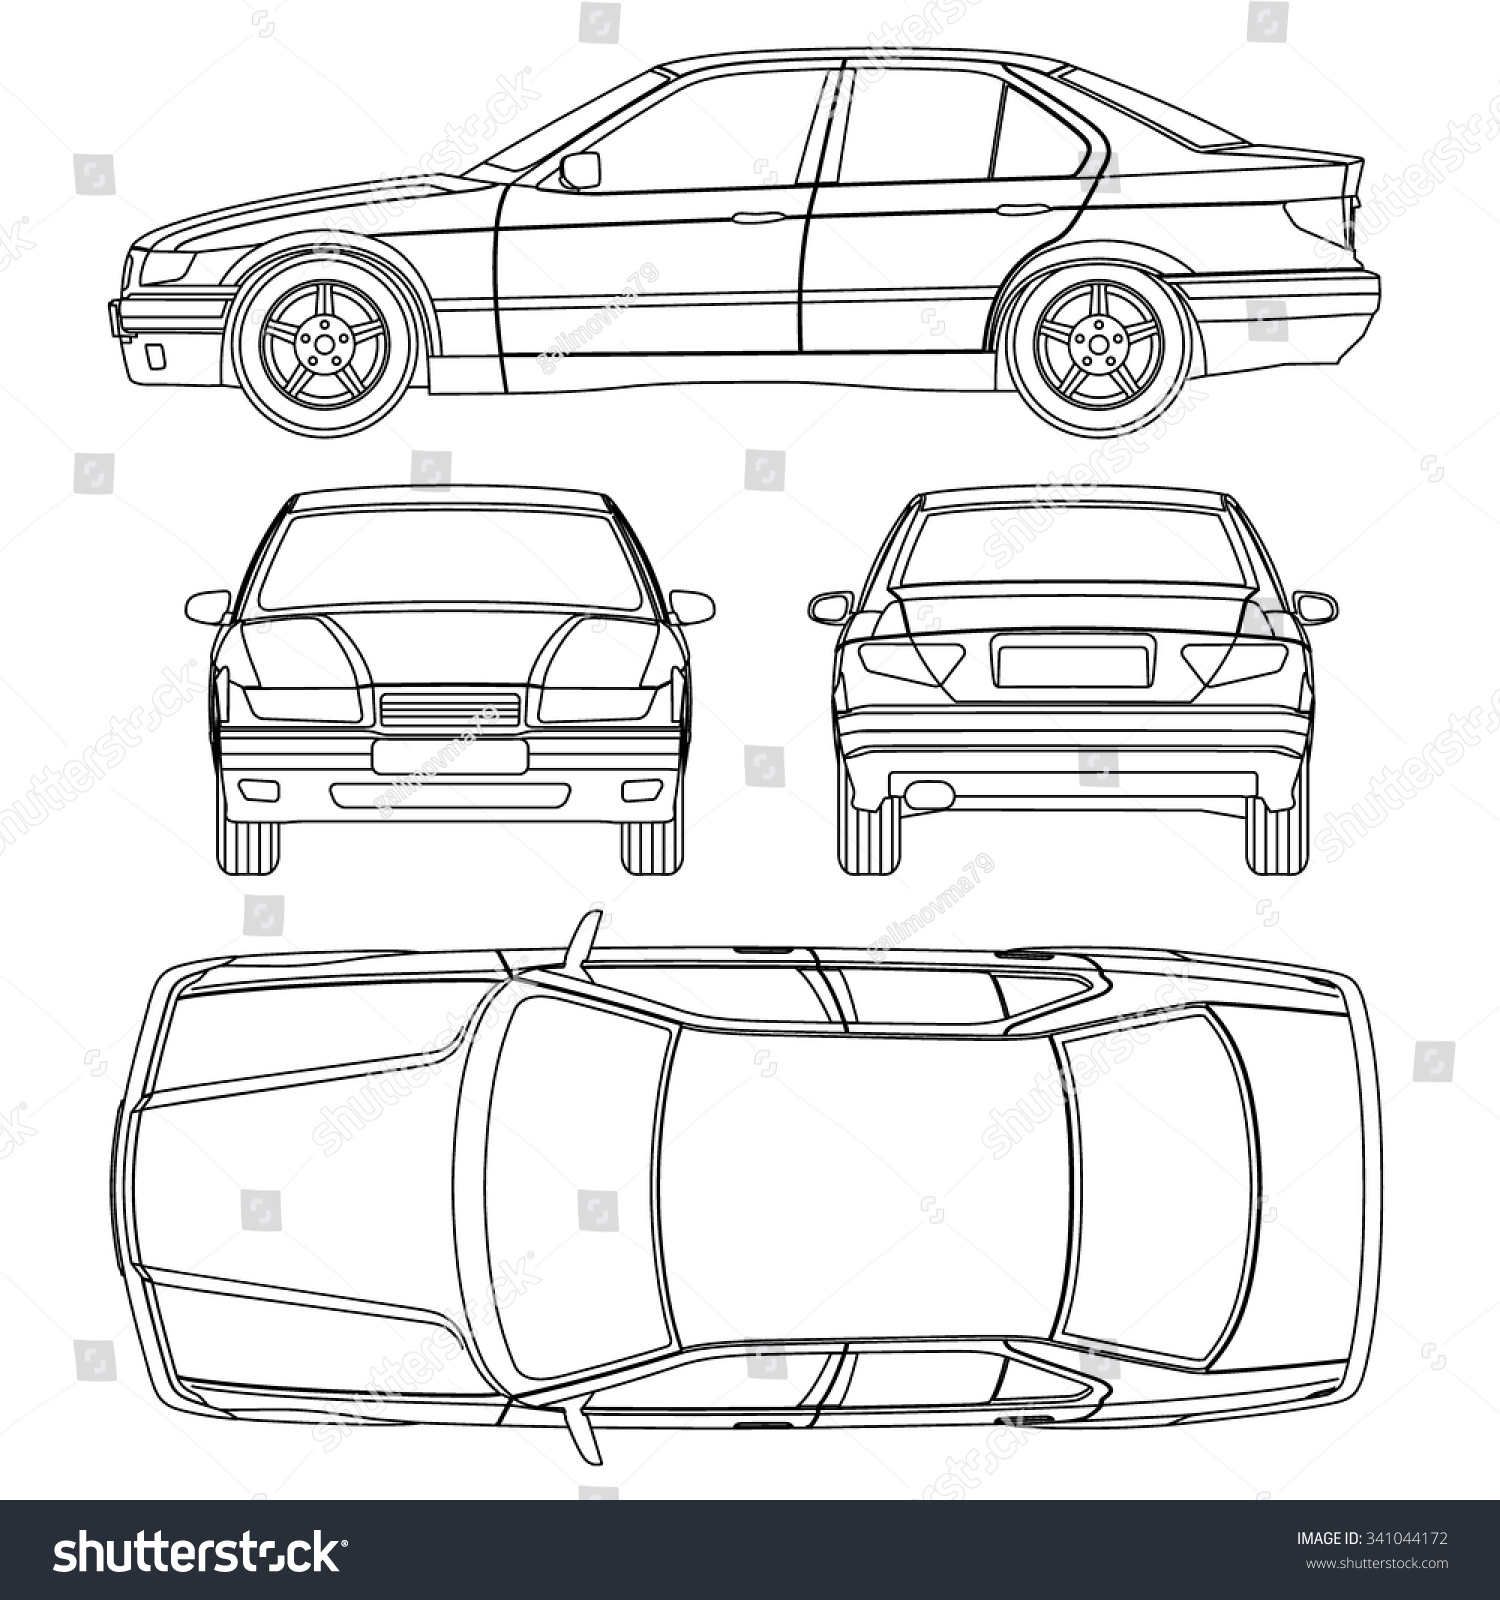 Car line draw condition/damage report form - Royalty Free Stock With Car Damage Report Template